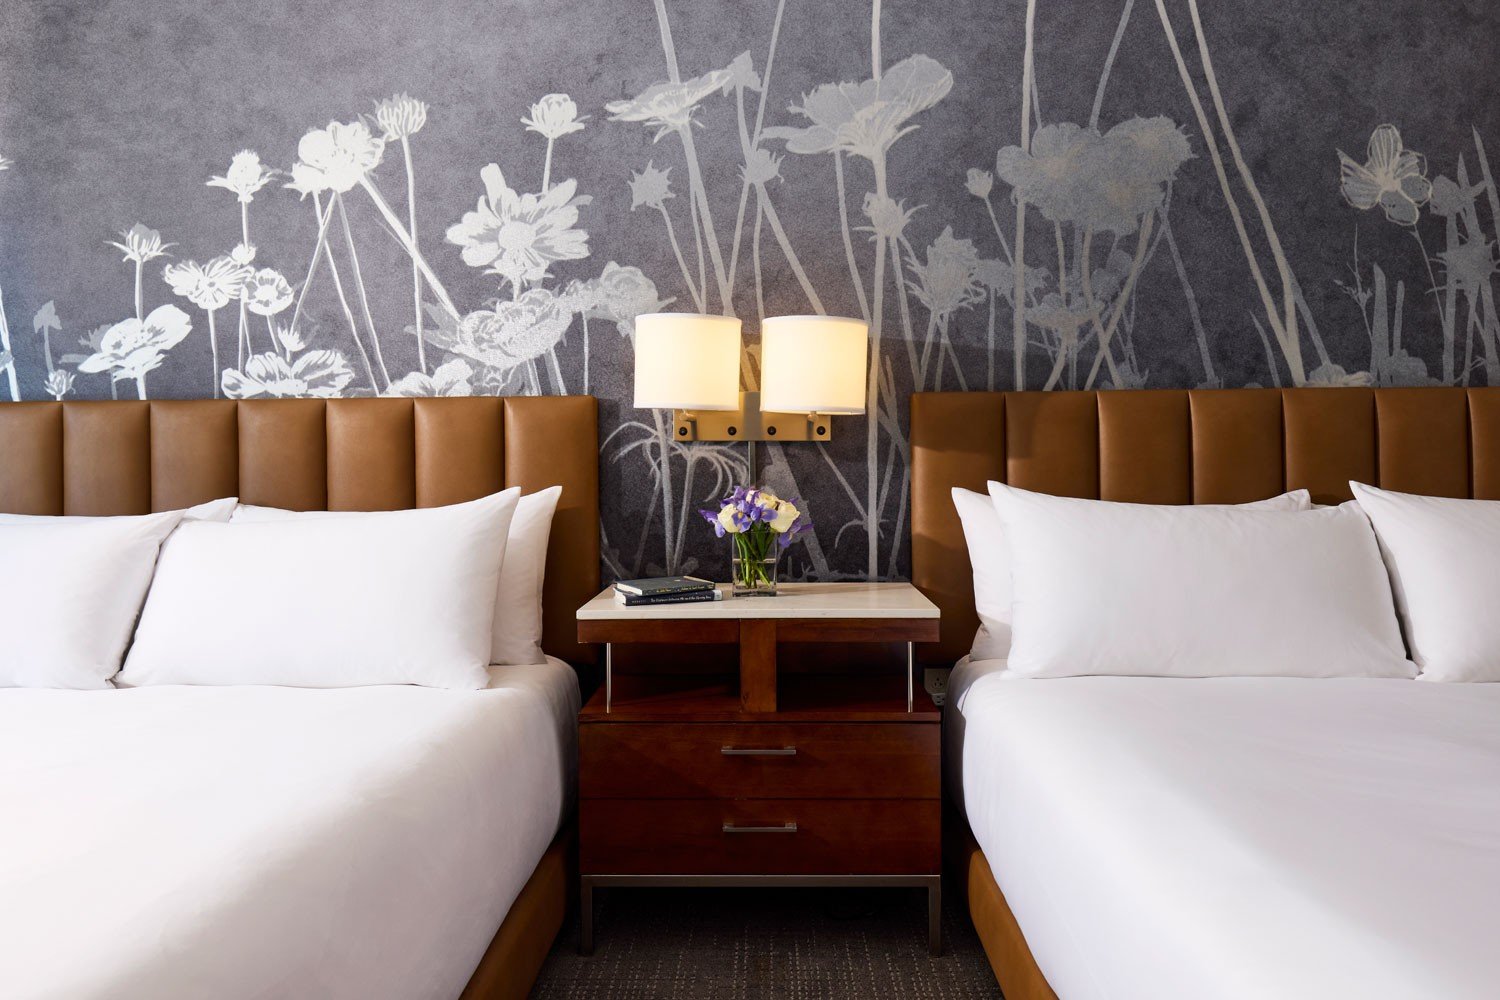 Archer Hotel Falls Church - Double King Guestroom with decorated wall